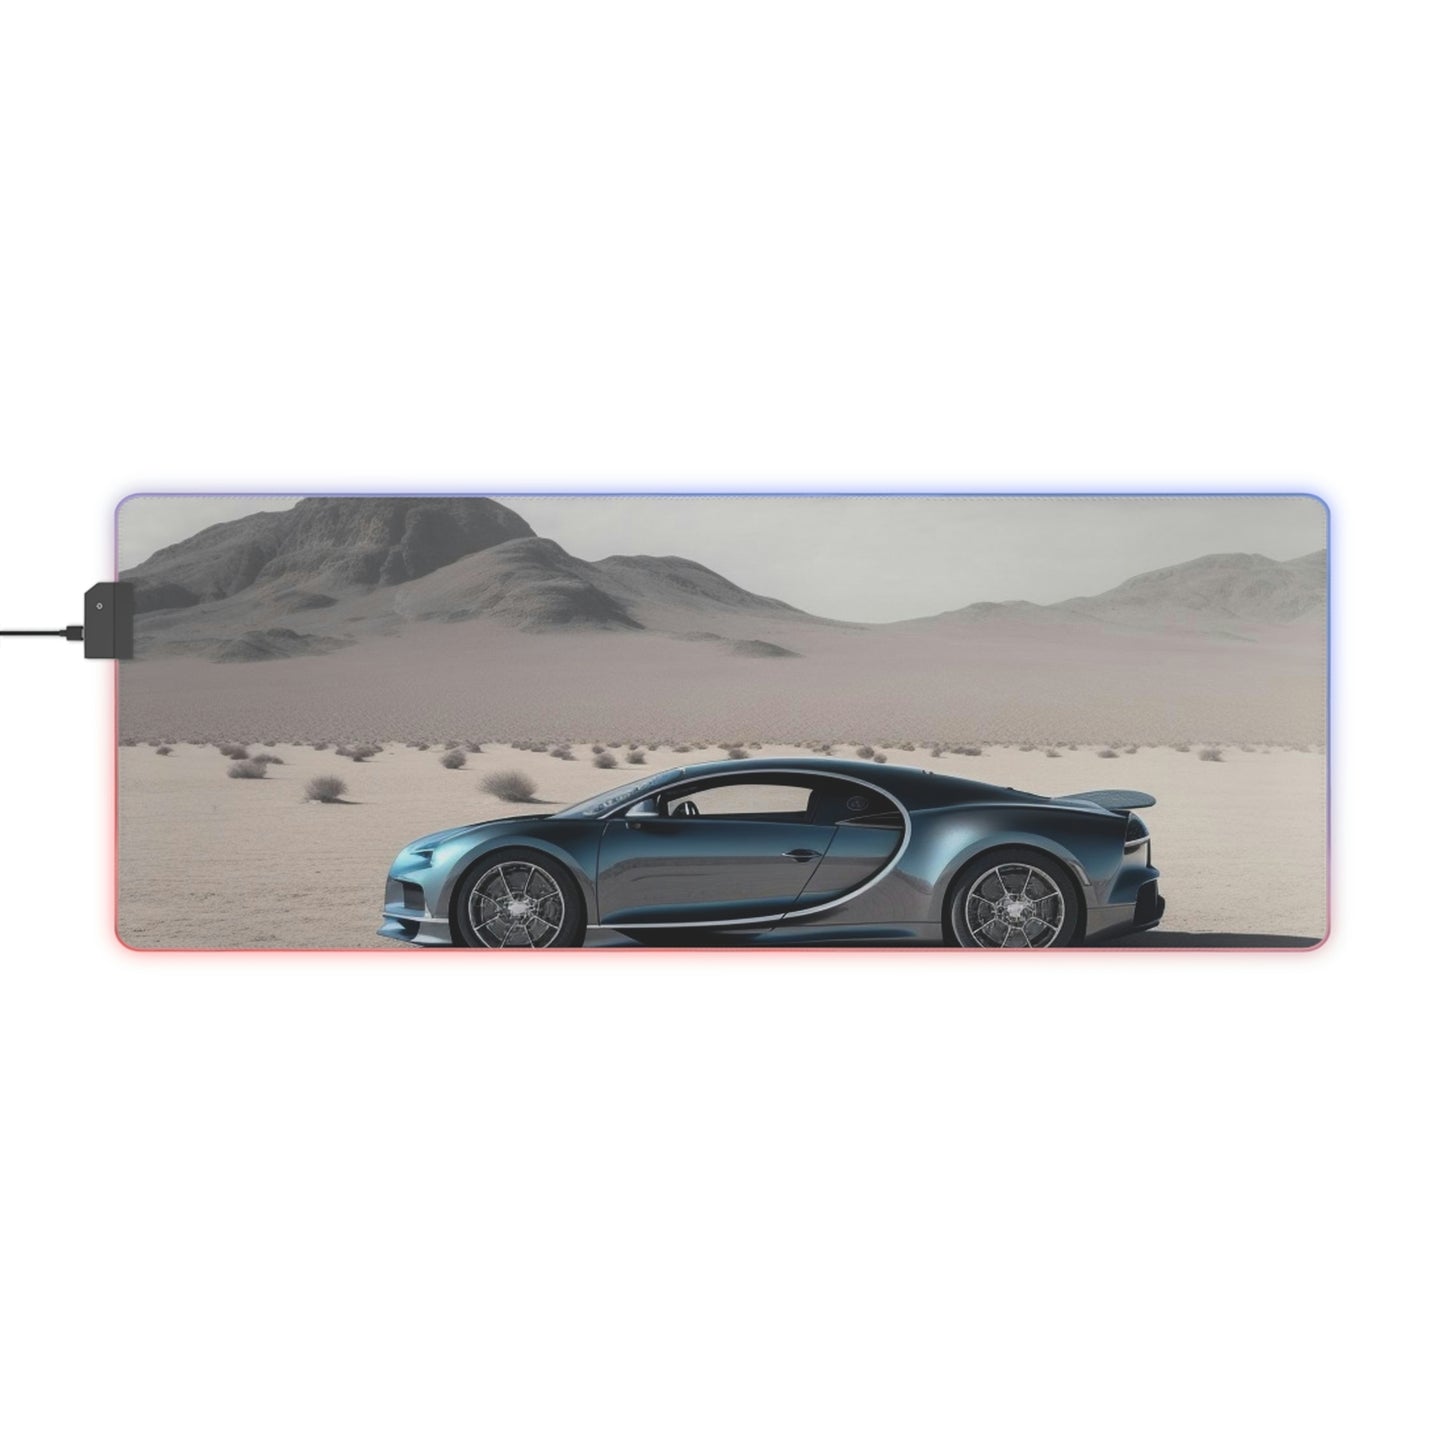 LED Gaming Mouse Pad Bugatti Real Look 1